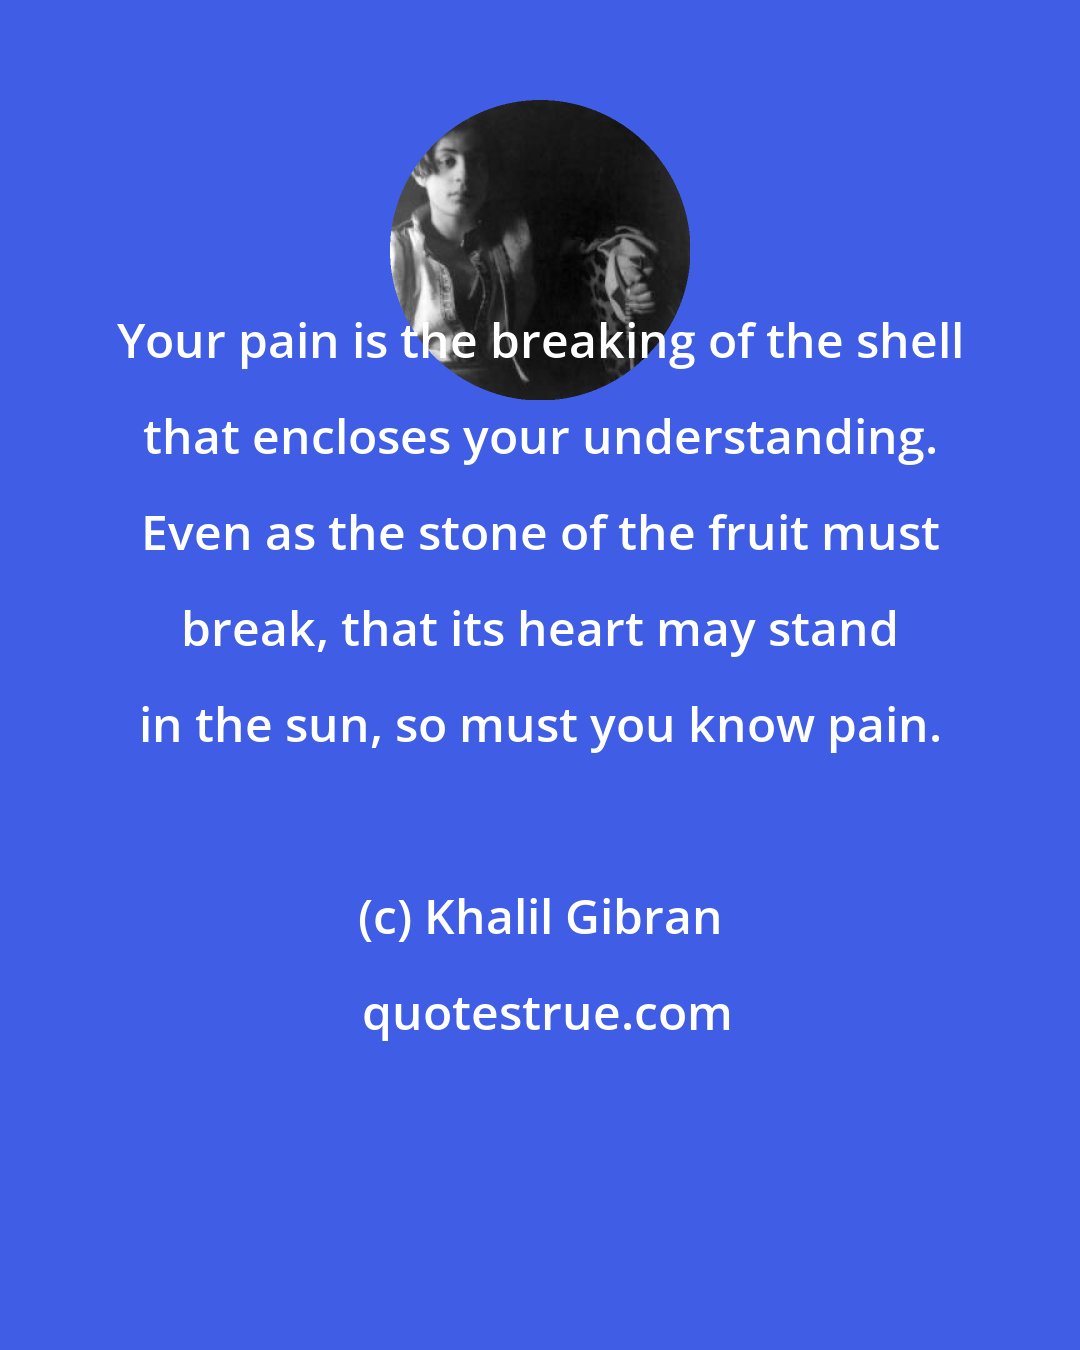 Khalil Gibran: Your pain is the breaking of the shell that encloses your understanding. Even as the stone of the fruit must break, that its heart may stand in the sun, so must you know pain.